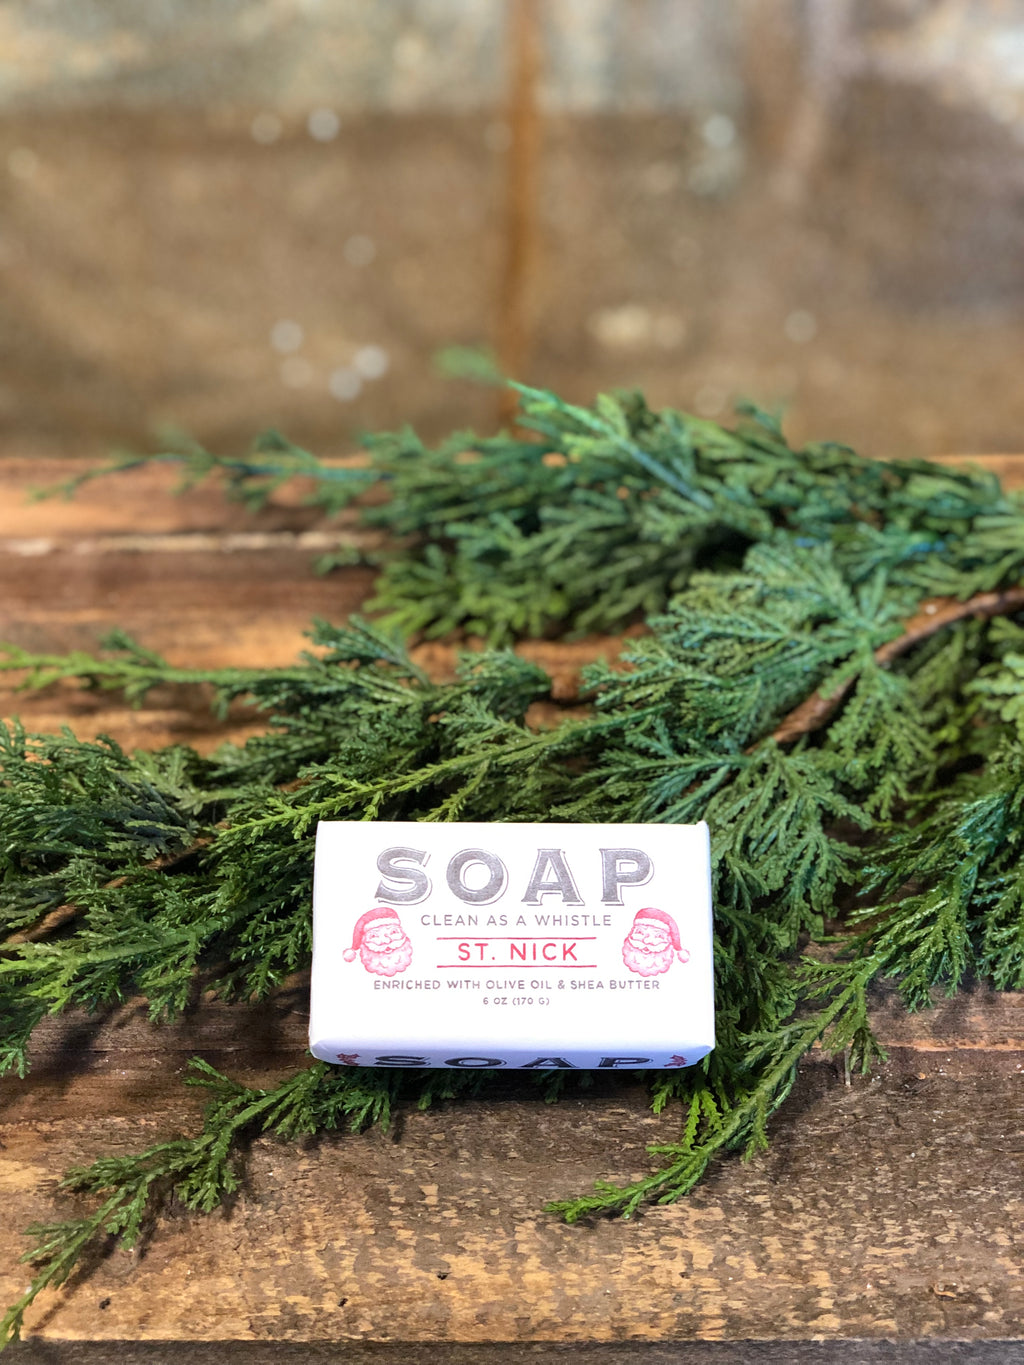 Olive Oil and Shea Butter Milled Bar Soap
Made in the U.S.A.